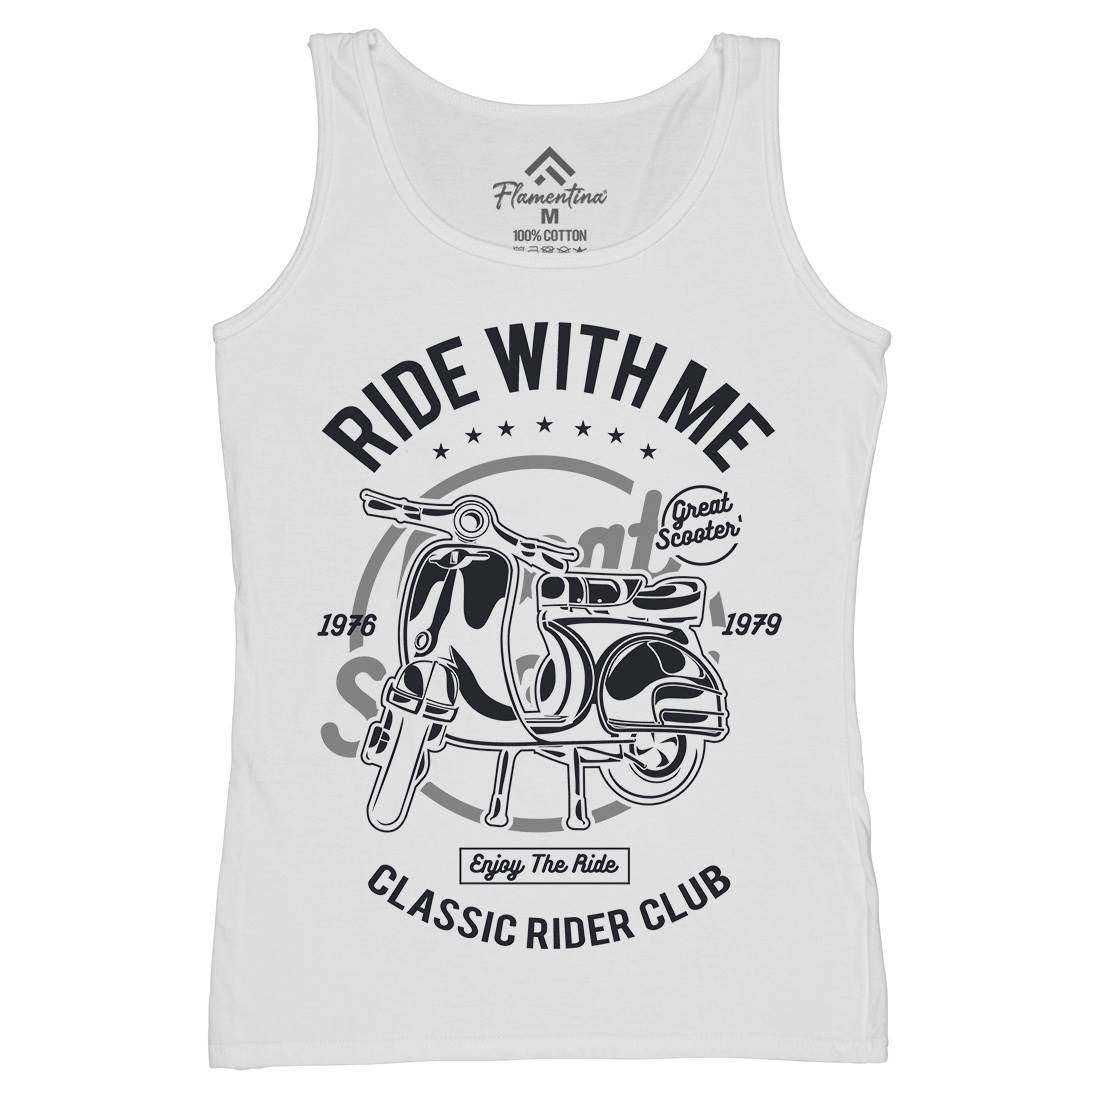 Ride With Me Womens Organic Tank Top Vest Motorcycles A120